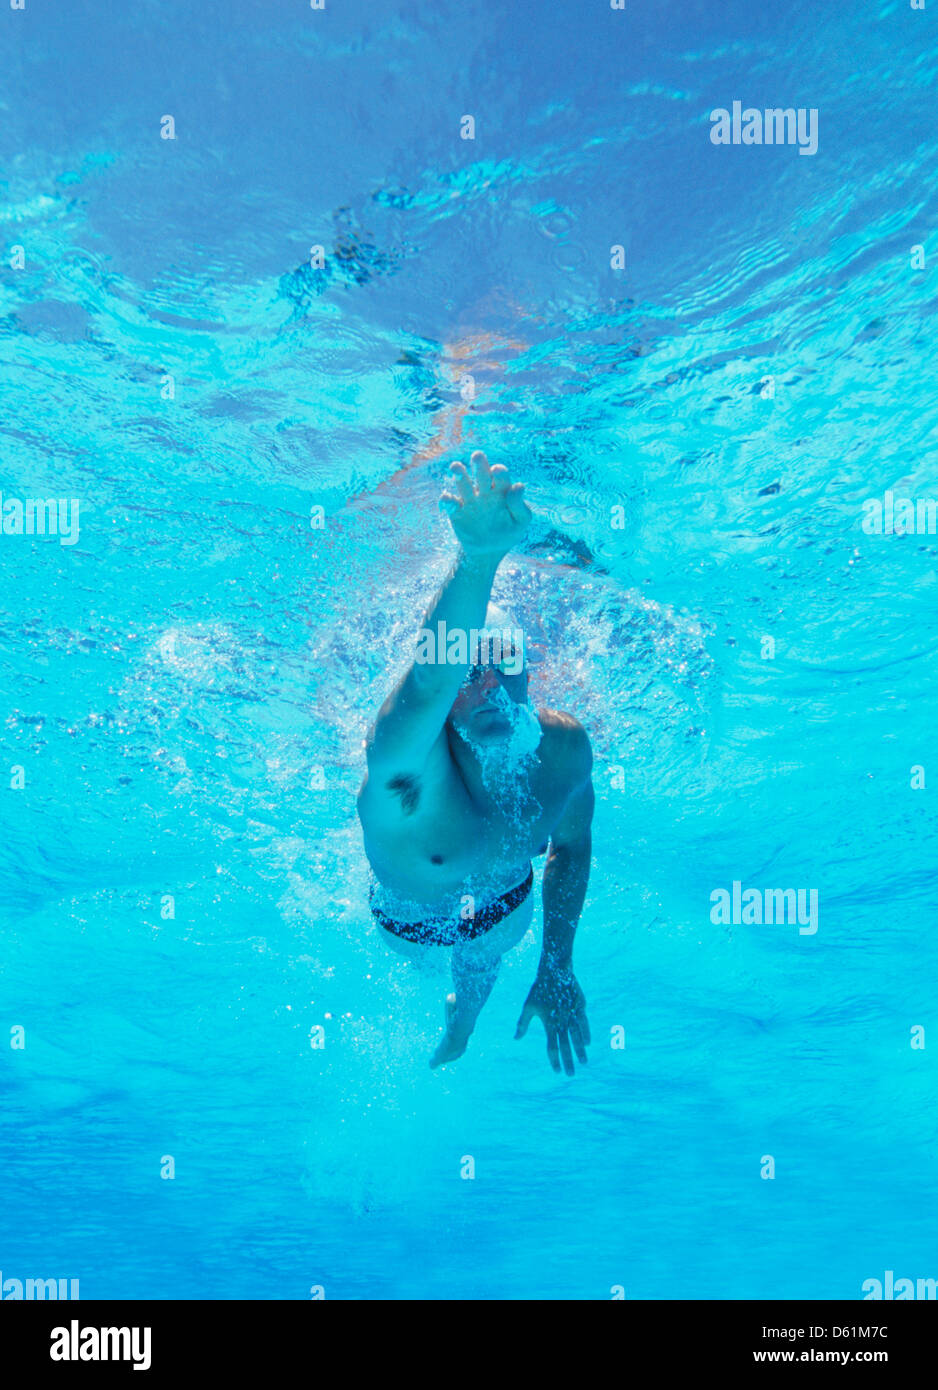 Underwater shot of professional male thlete swimming in pool